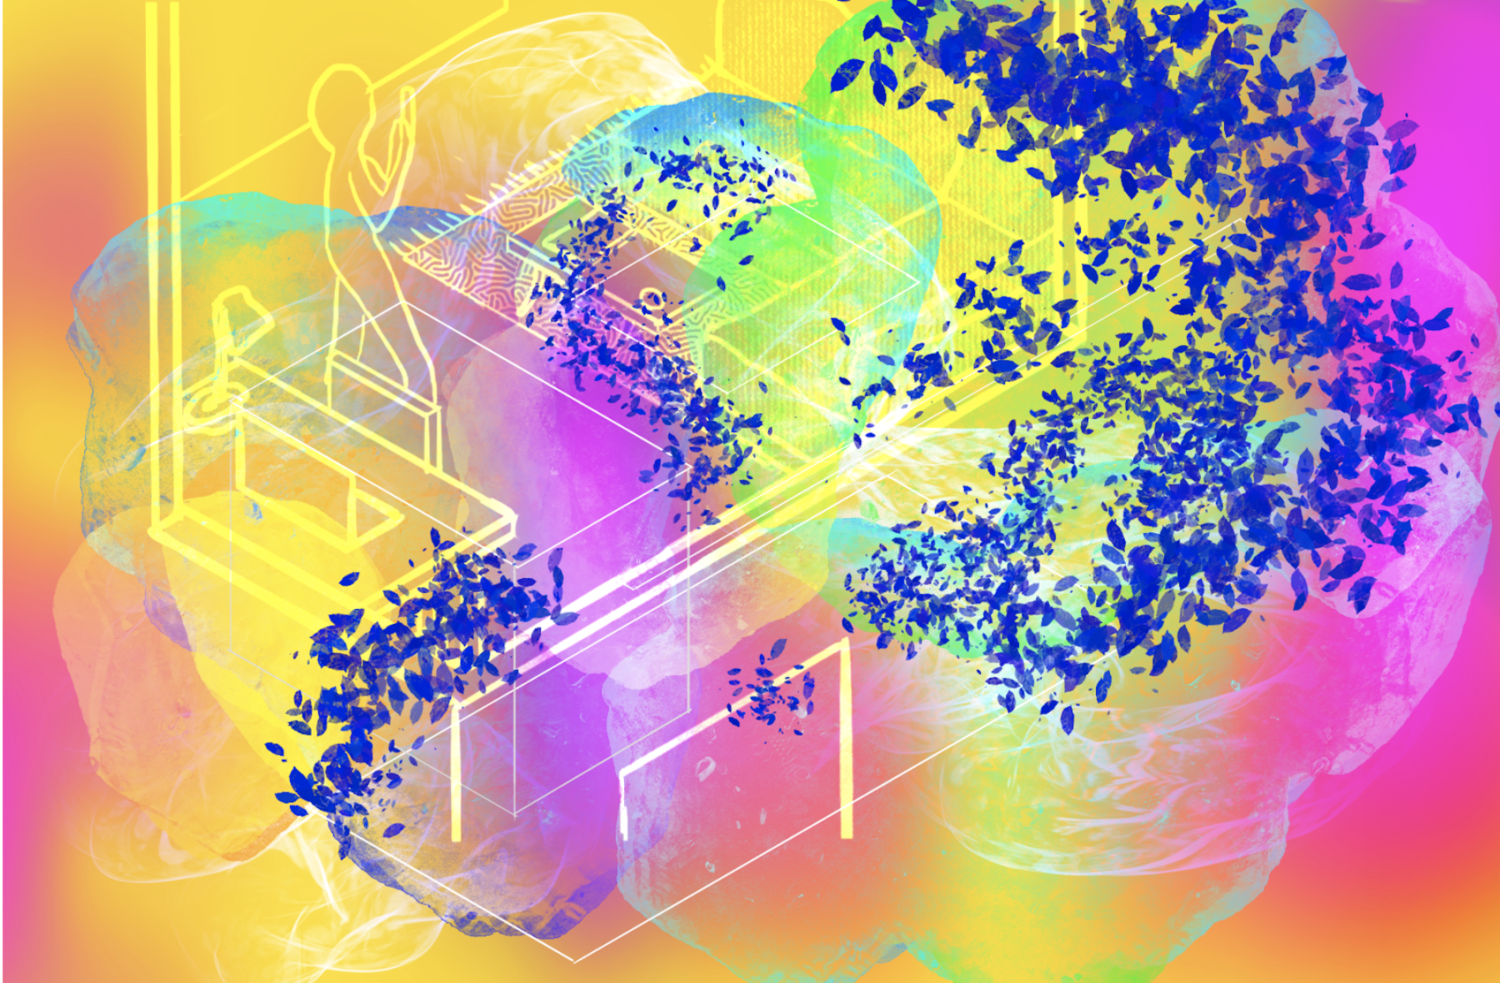 Blips of the Universe by Jessy Escobedo. A digital print of vibrant swirling colors over and across a neon line drawing of a figure in a bedroom.